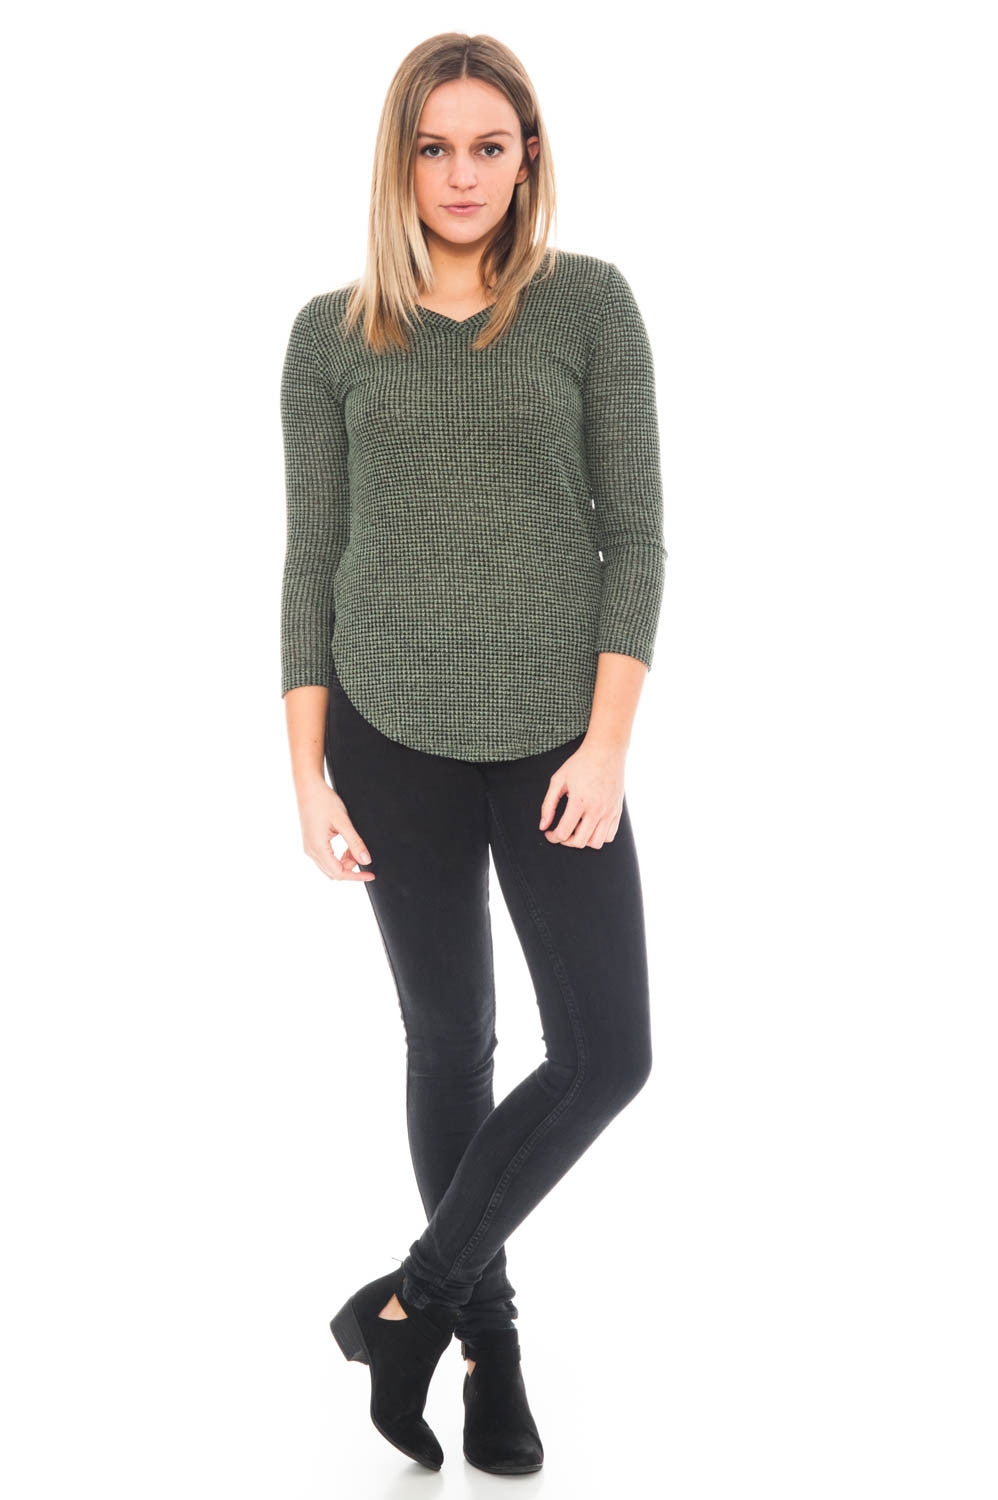 Sweater - 3/4 Sleeve Waffle Knit High Low Top